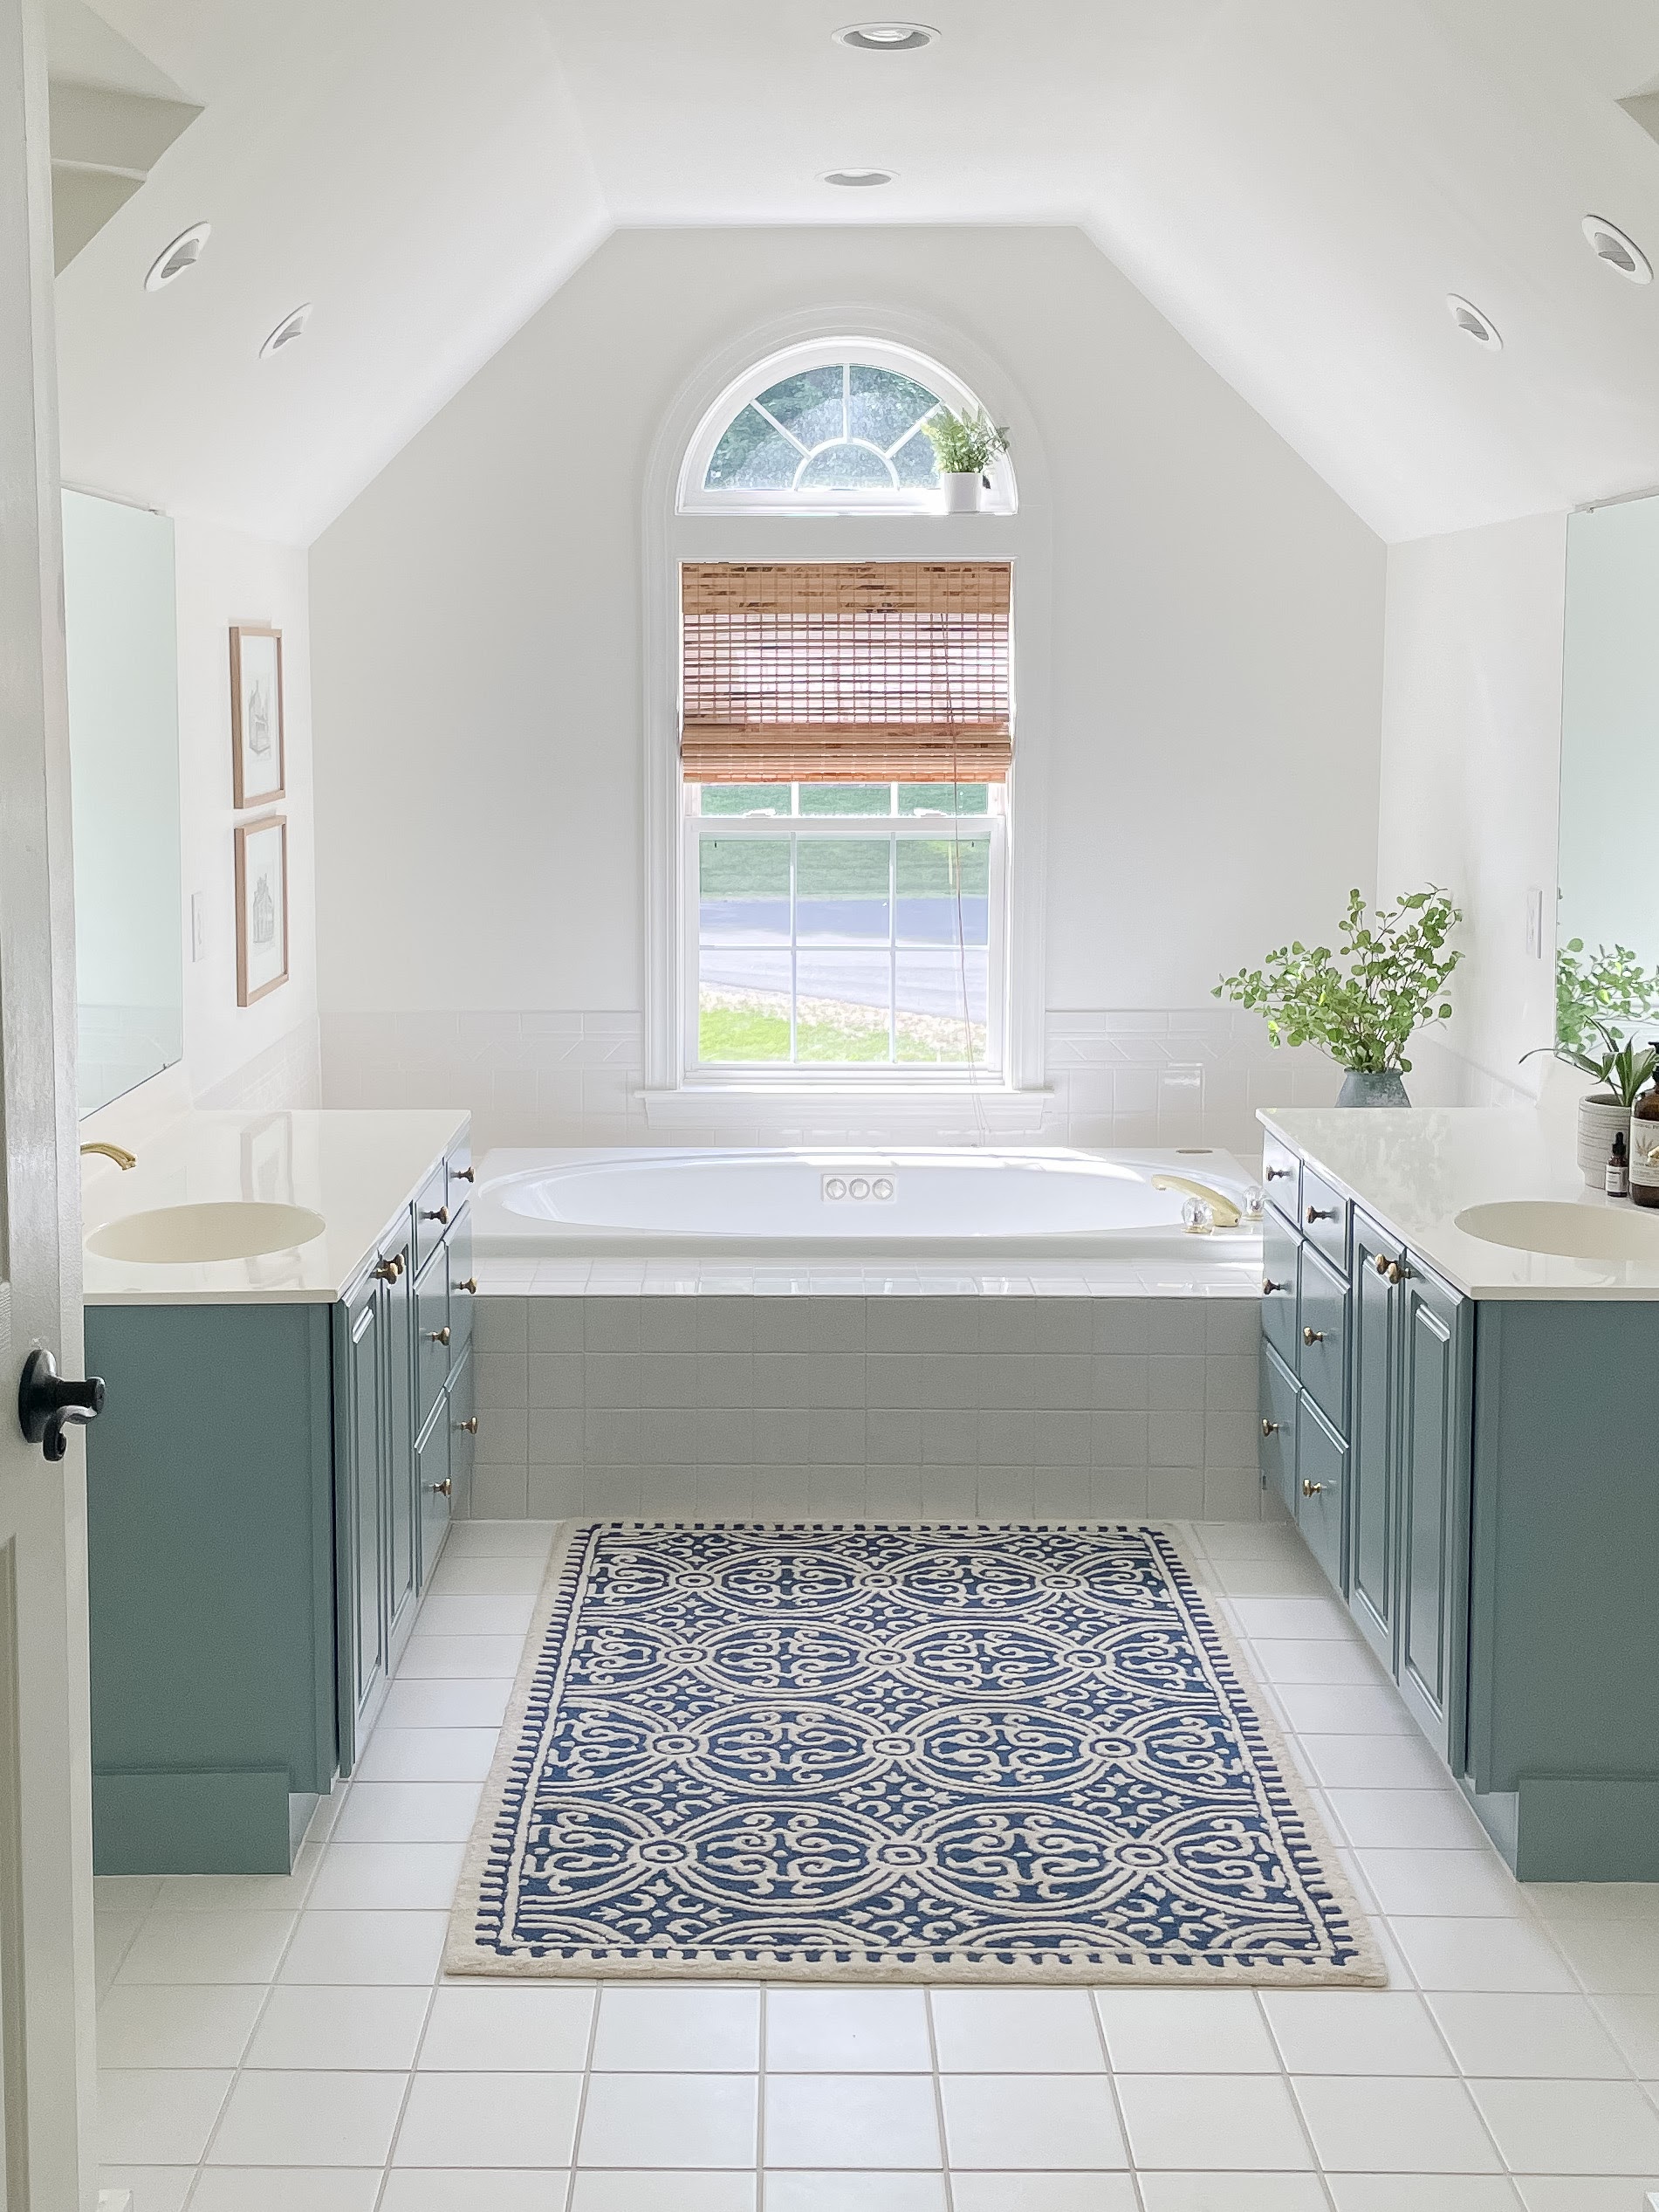 White bathroom with paint thermofoil bathroom cabinets with blue paint, rug and vase of greenery